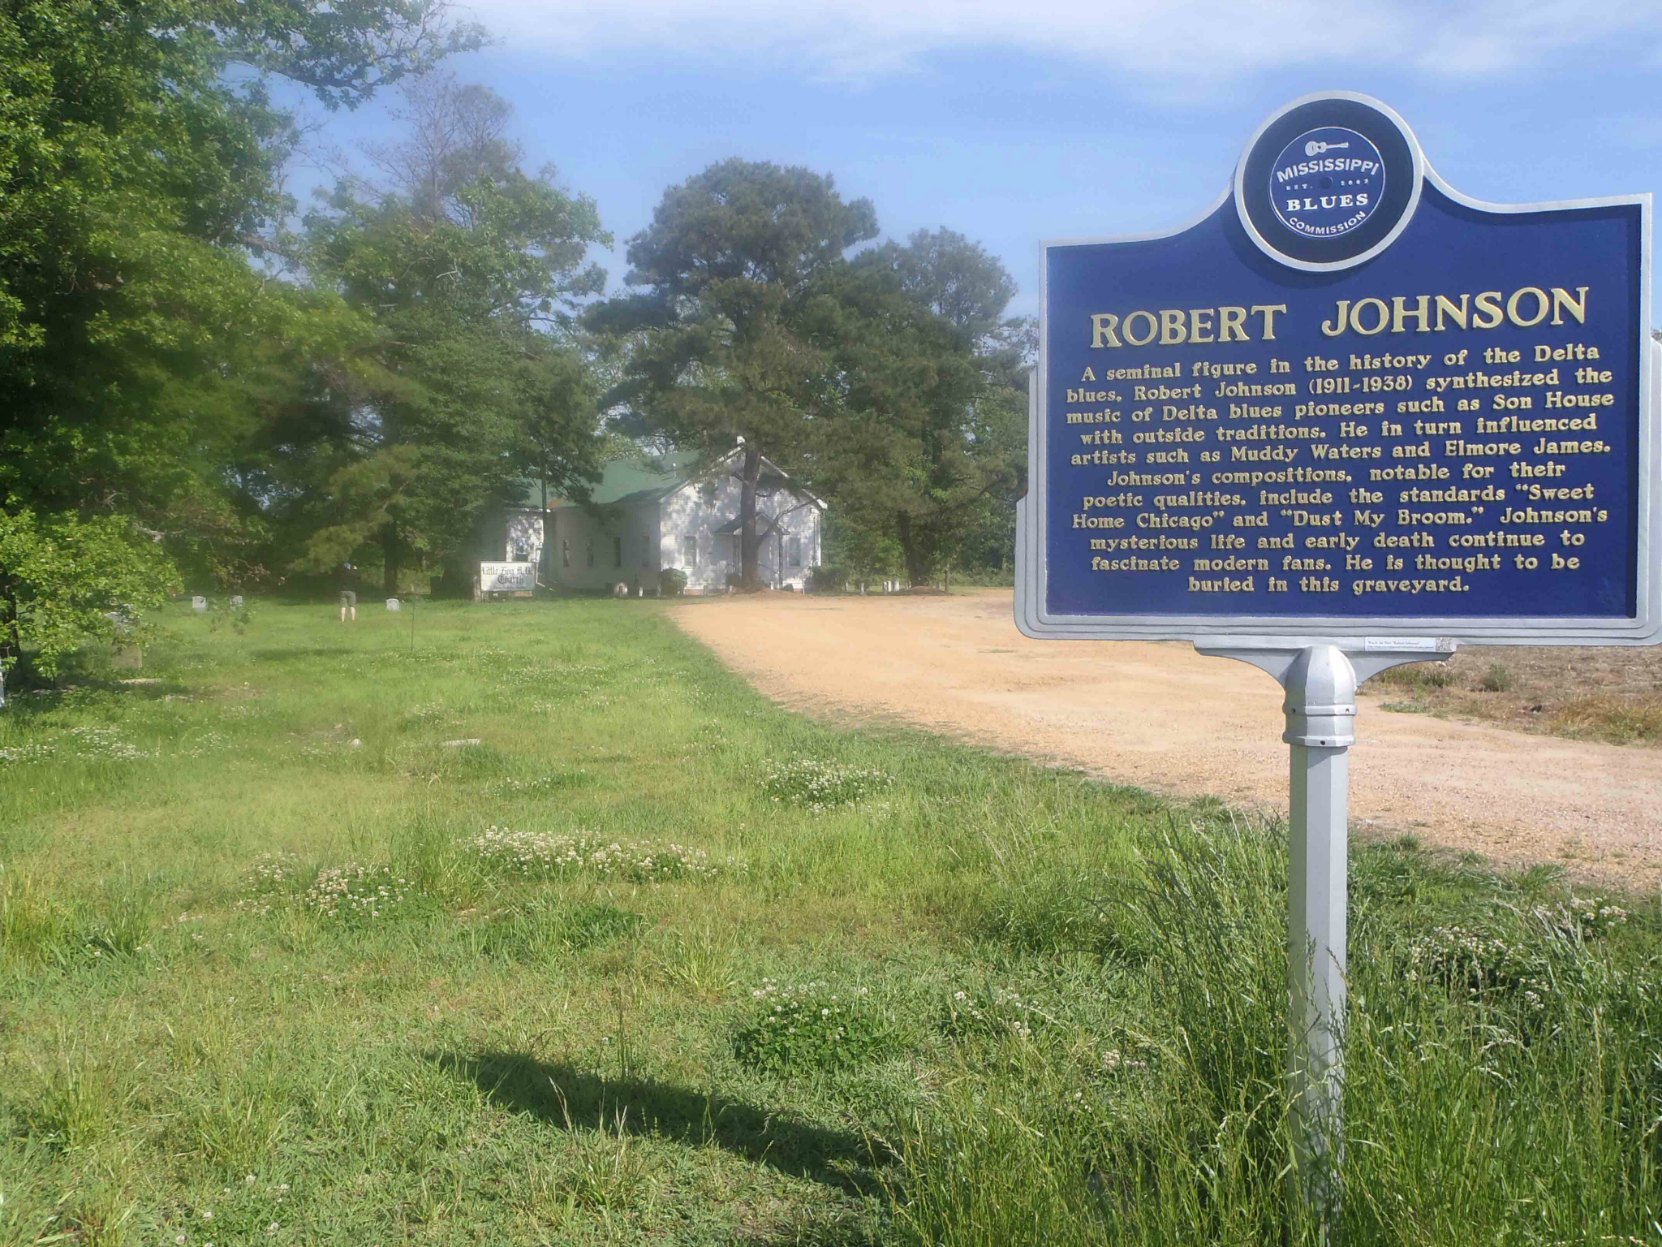 Mississippi Blues Trail marker for Robert Johnson, Little Zion Missionary Baptist Church, Money Road, Leflore County, Mississippi